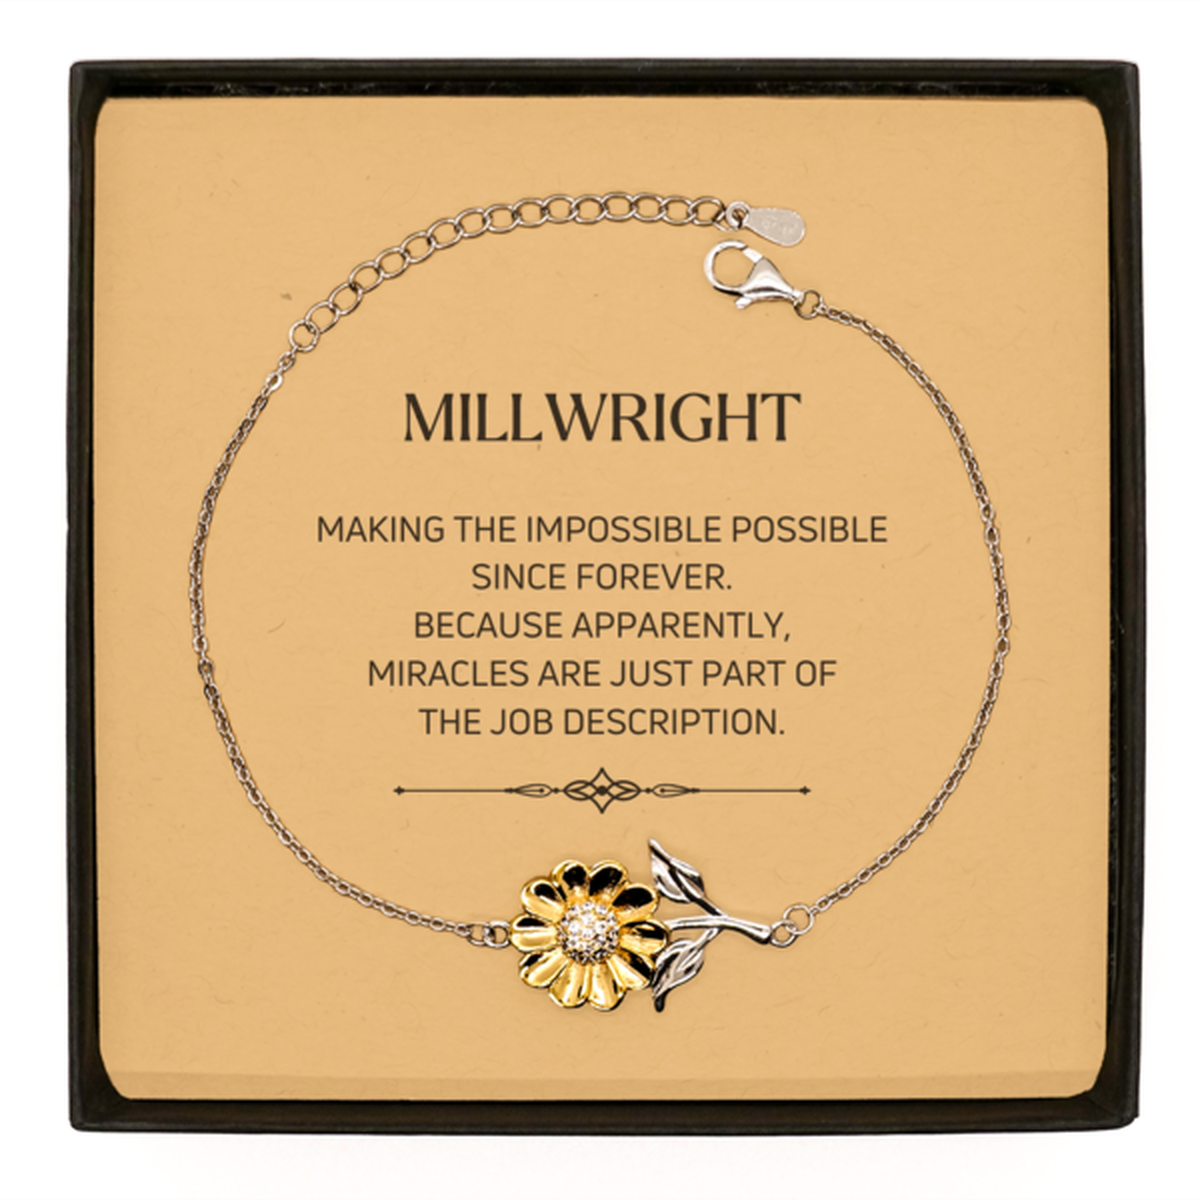 Funny Millwright Gifts, Miracles are just part of the job description, Inspirational Birthday Sunflower Bracelet For Millwright, Men, Women, Coworkers, Friends, Boss